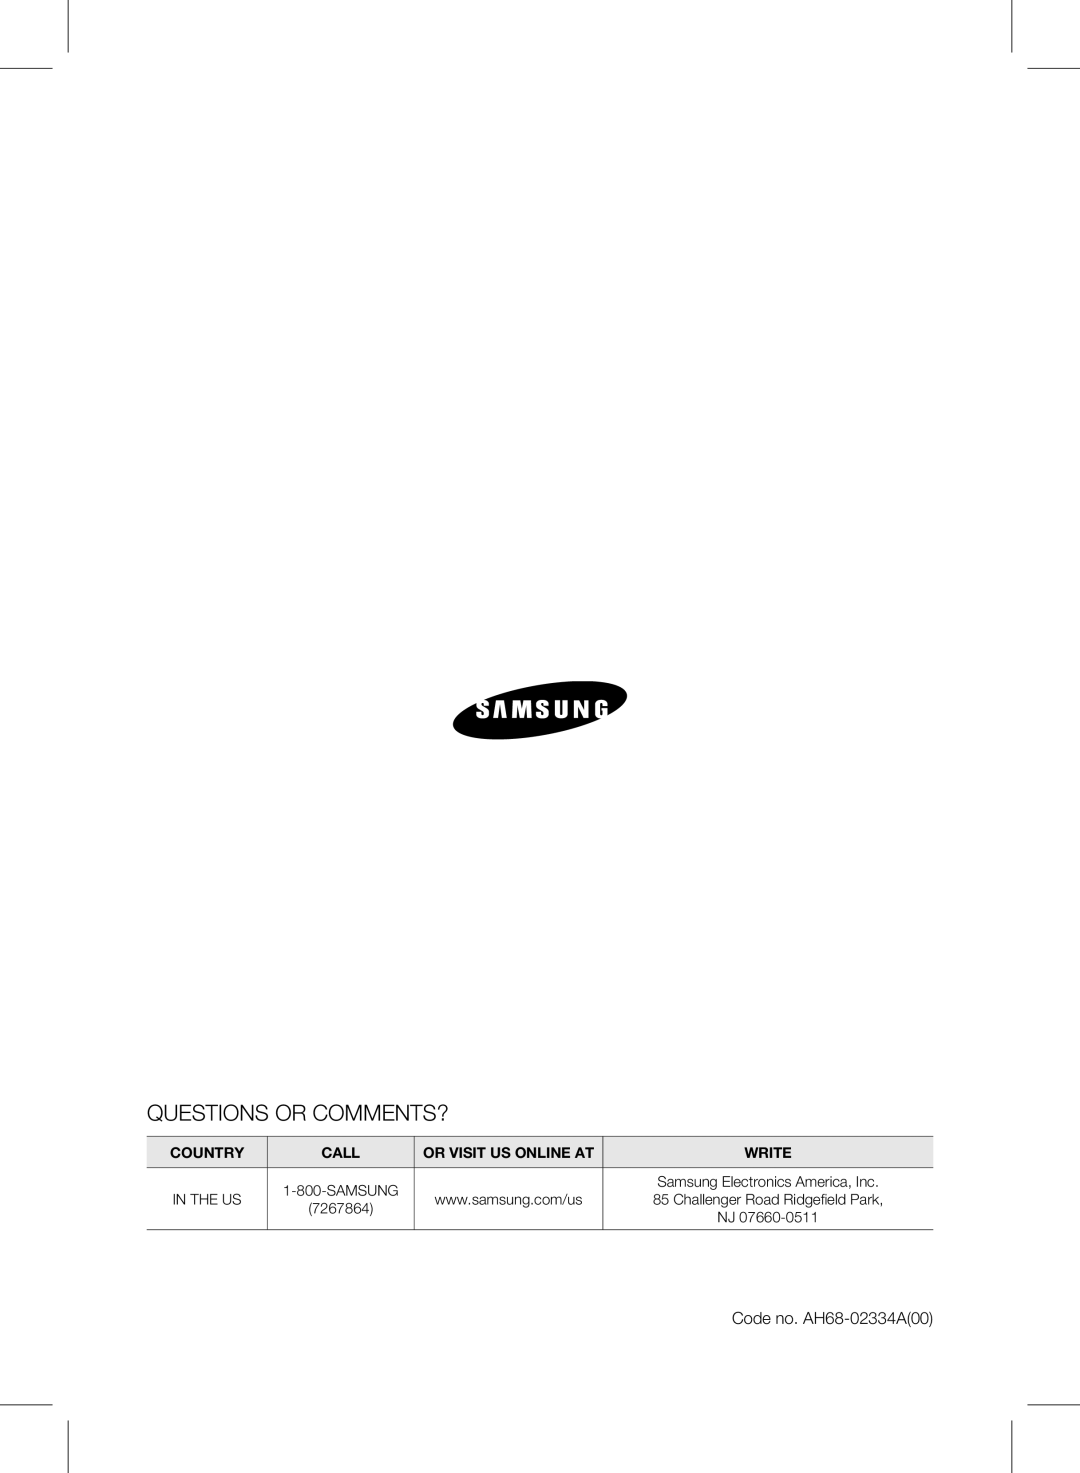 Samsung HW-D550 Questions Or Comments?, Samsung Electronics America, Inc, Challenger Road Ridgefield Park, 7267864 